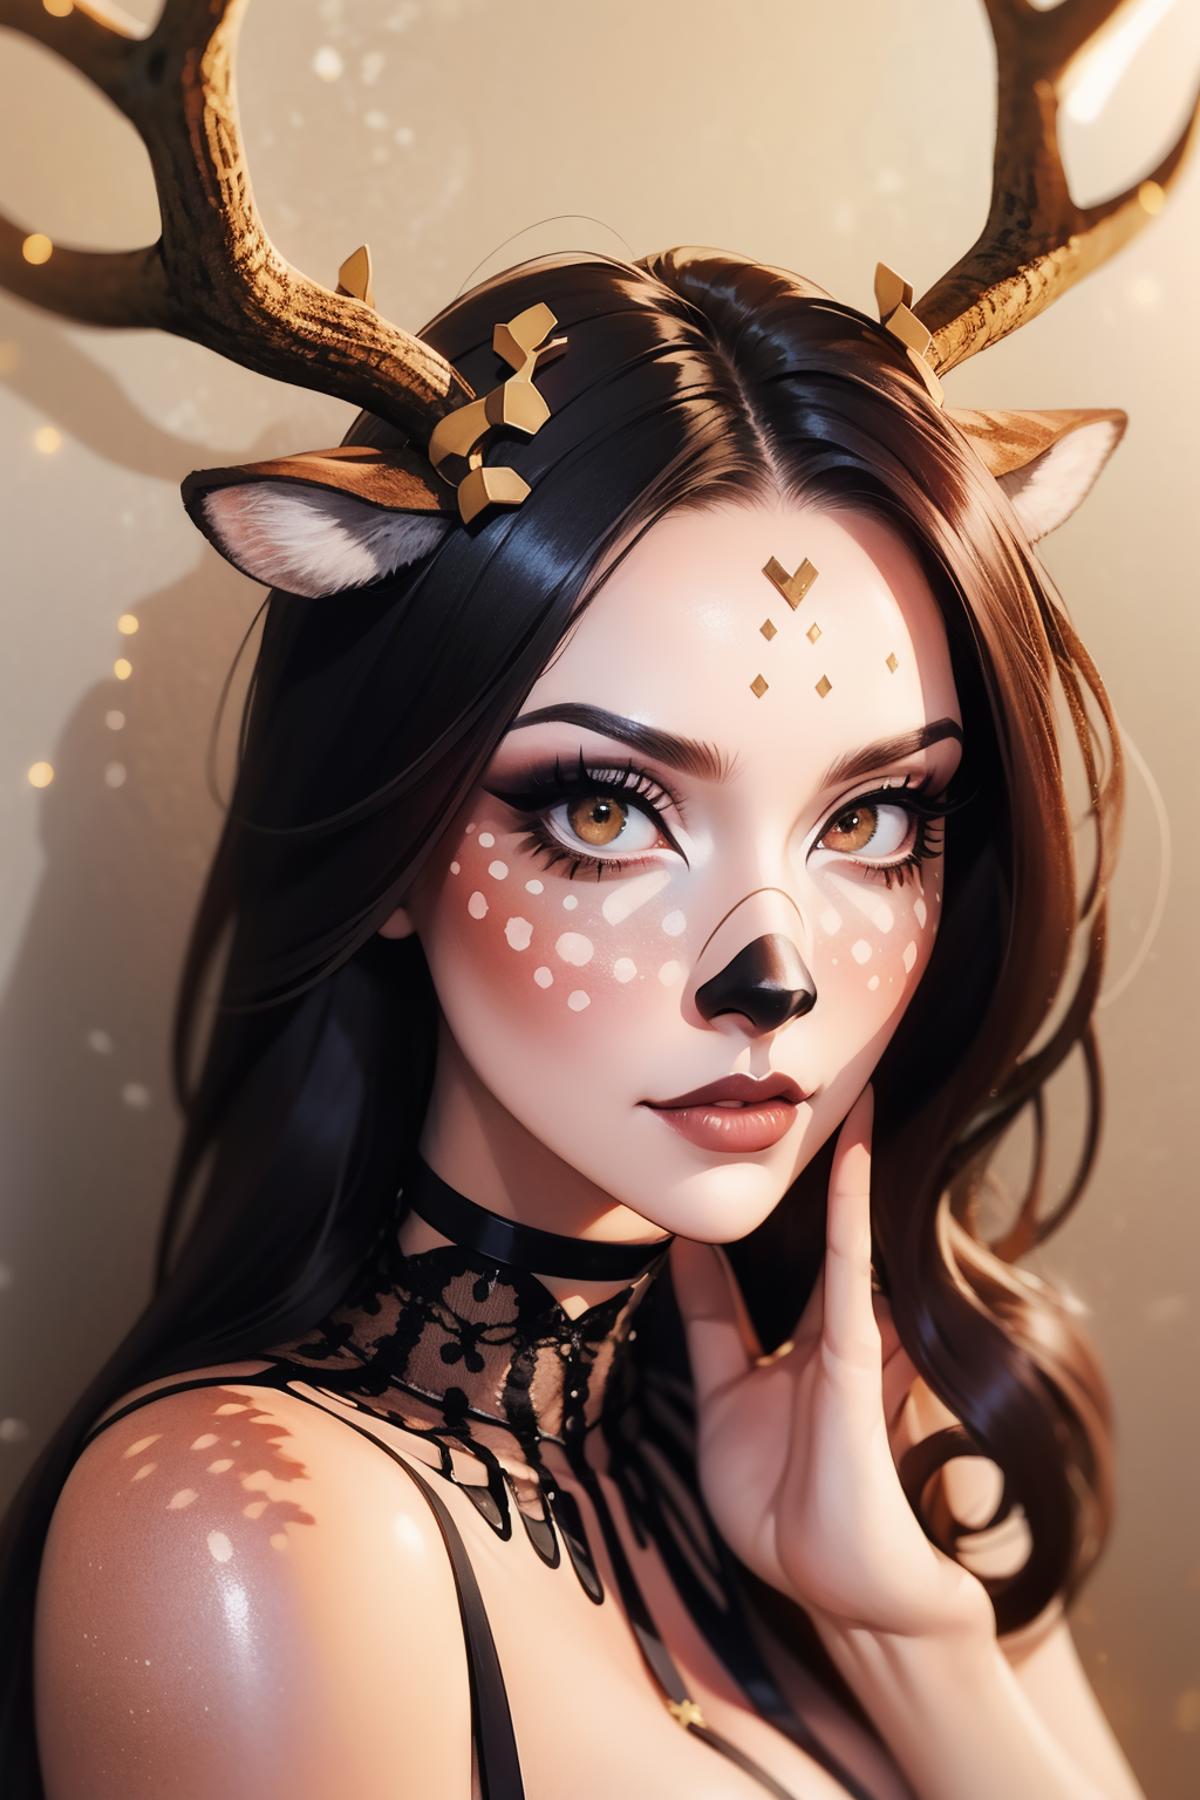 AI model image by freckledvixon